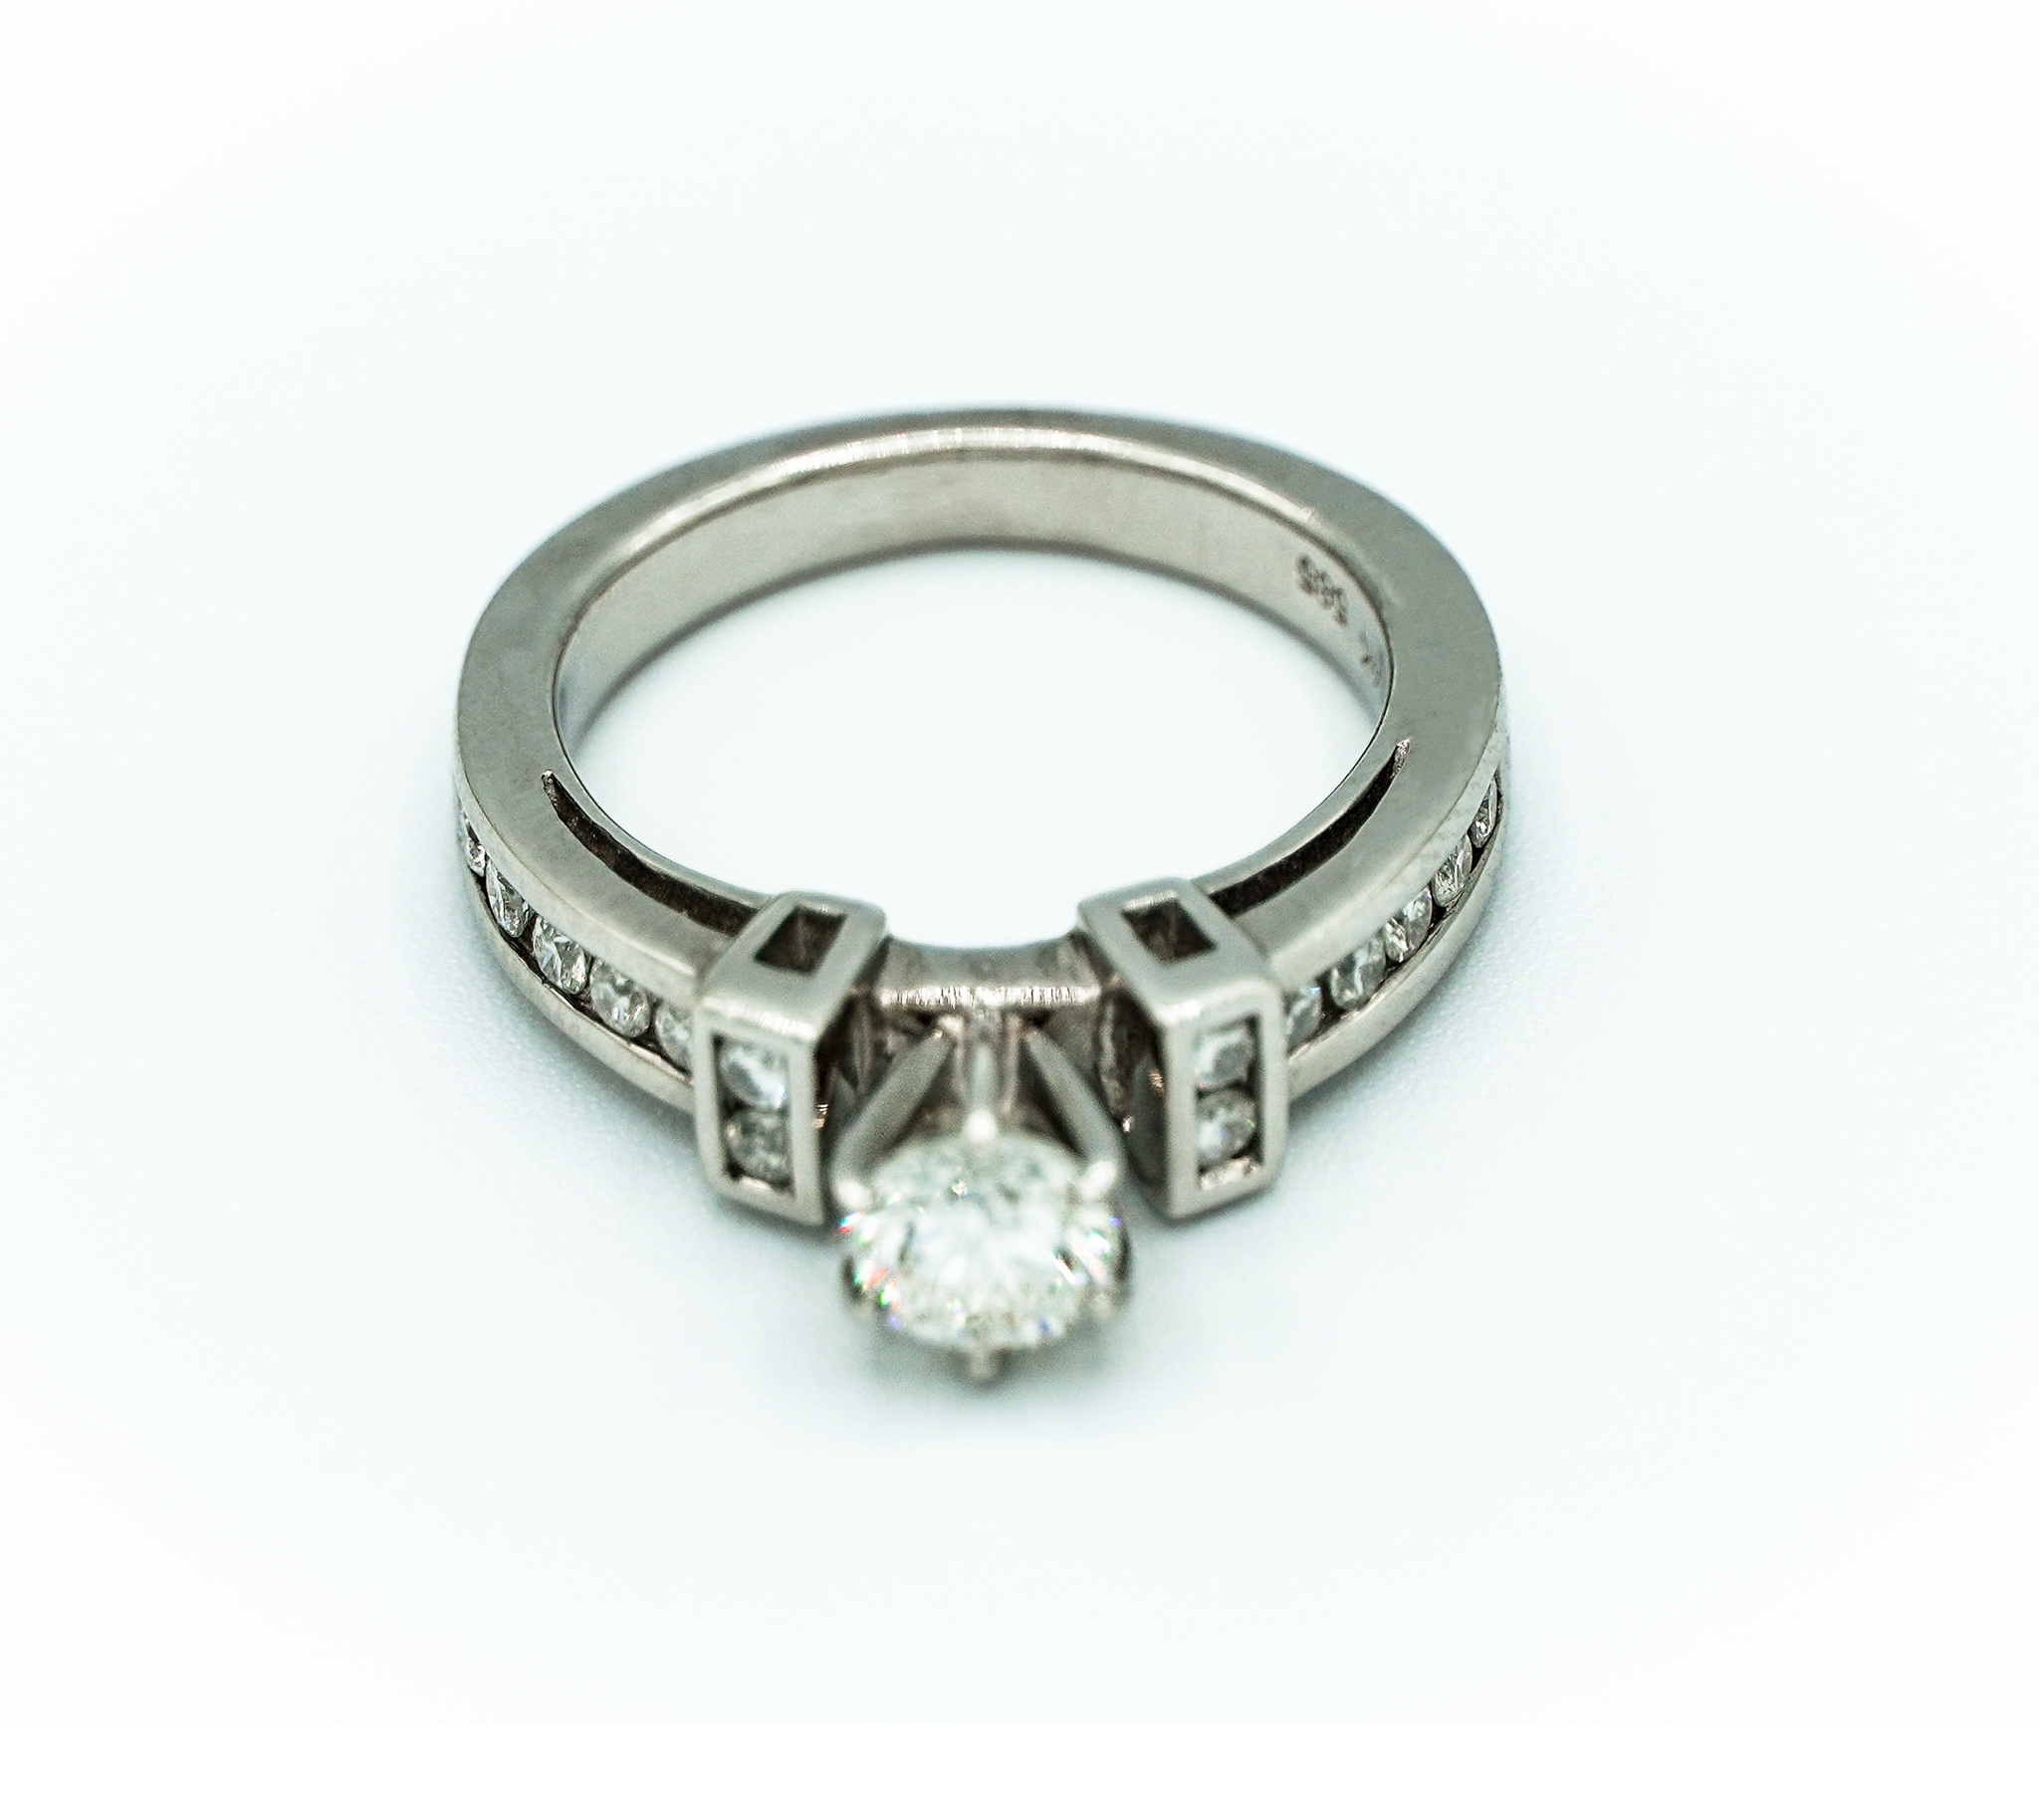 Montalvo Diamonds - Round Brilliant Cut Ring with Side Stones in 14kt White Gold